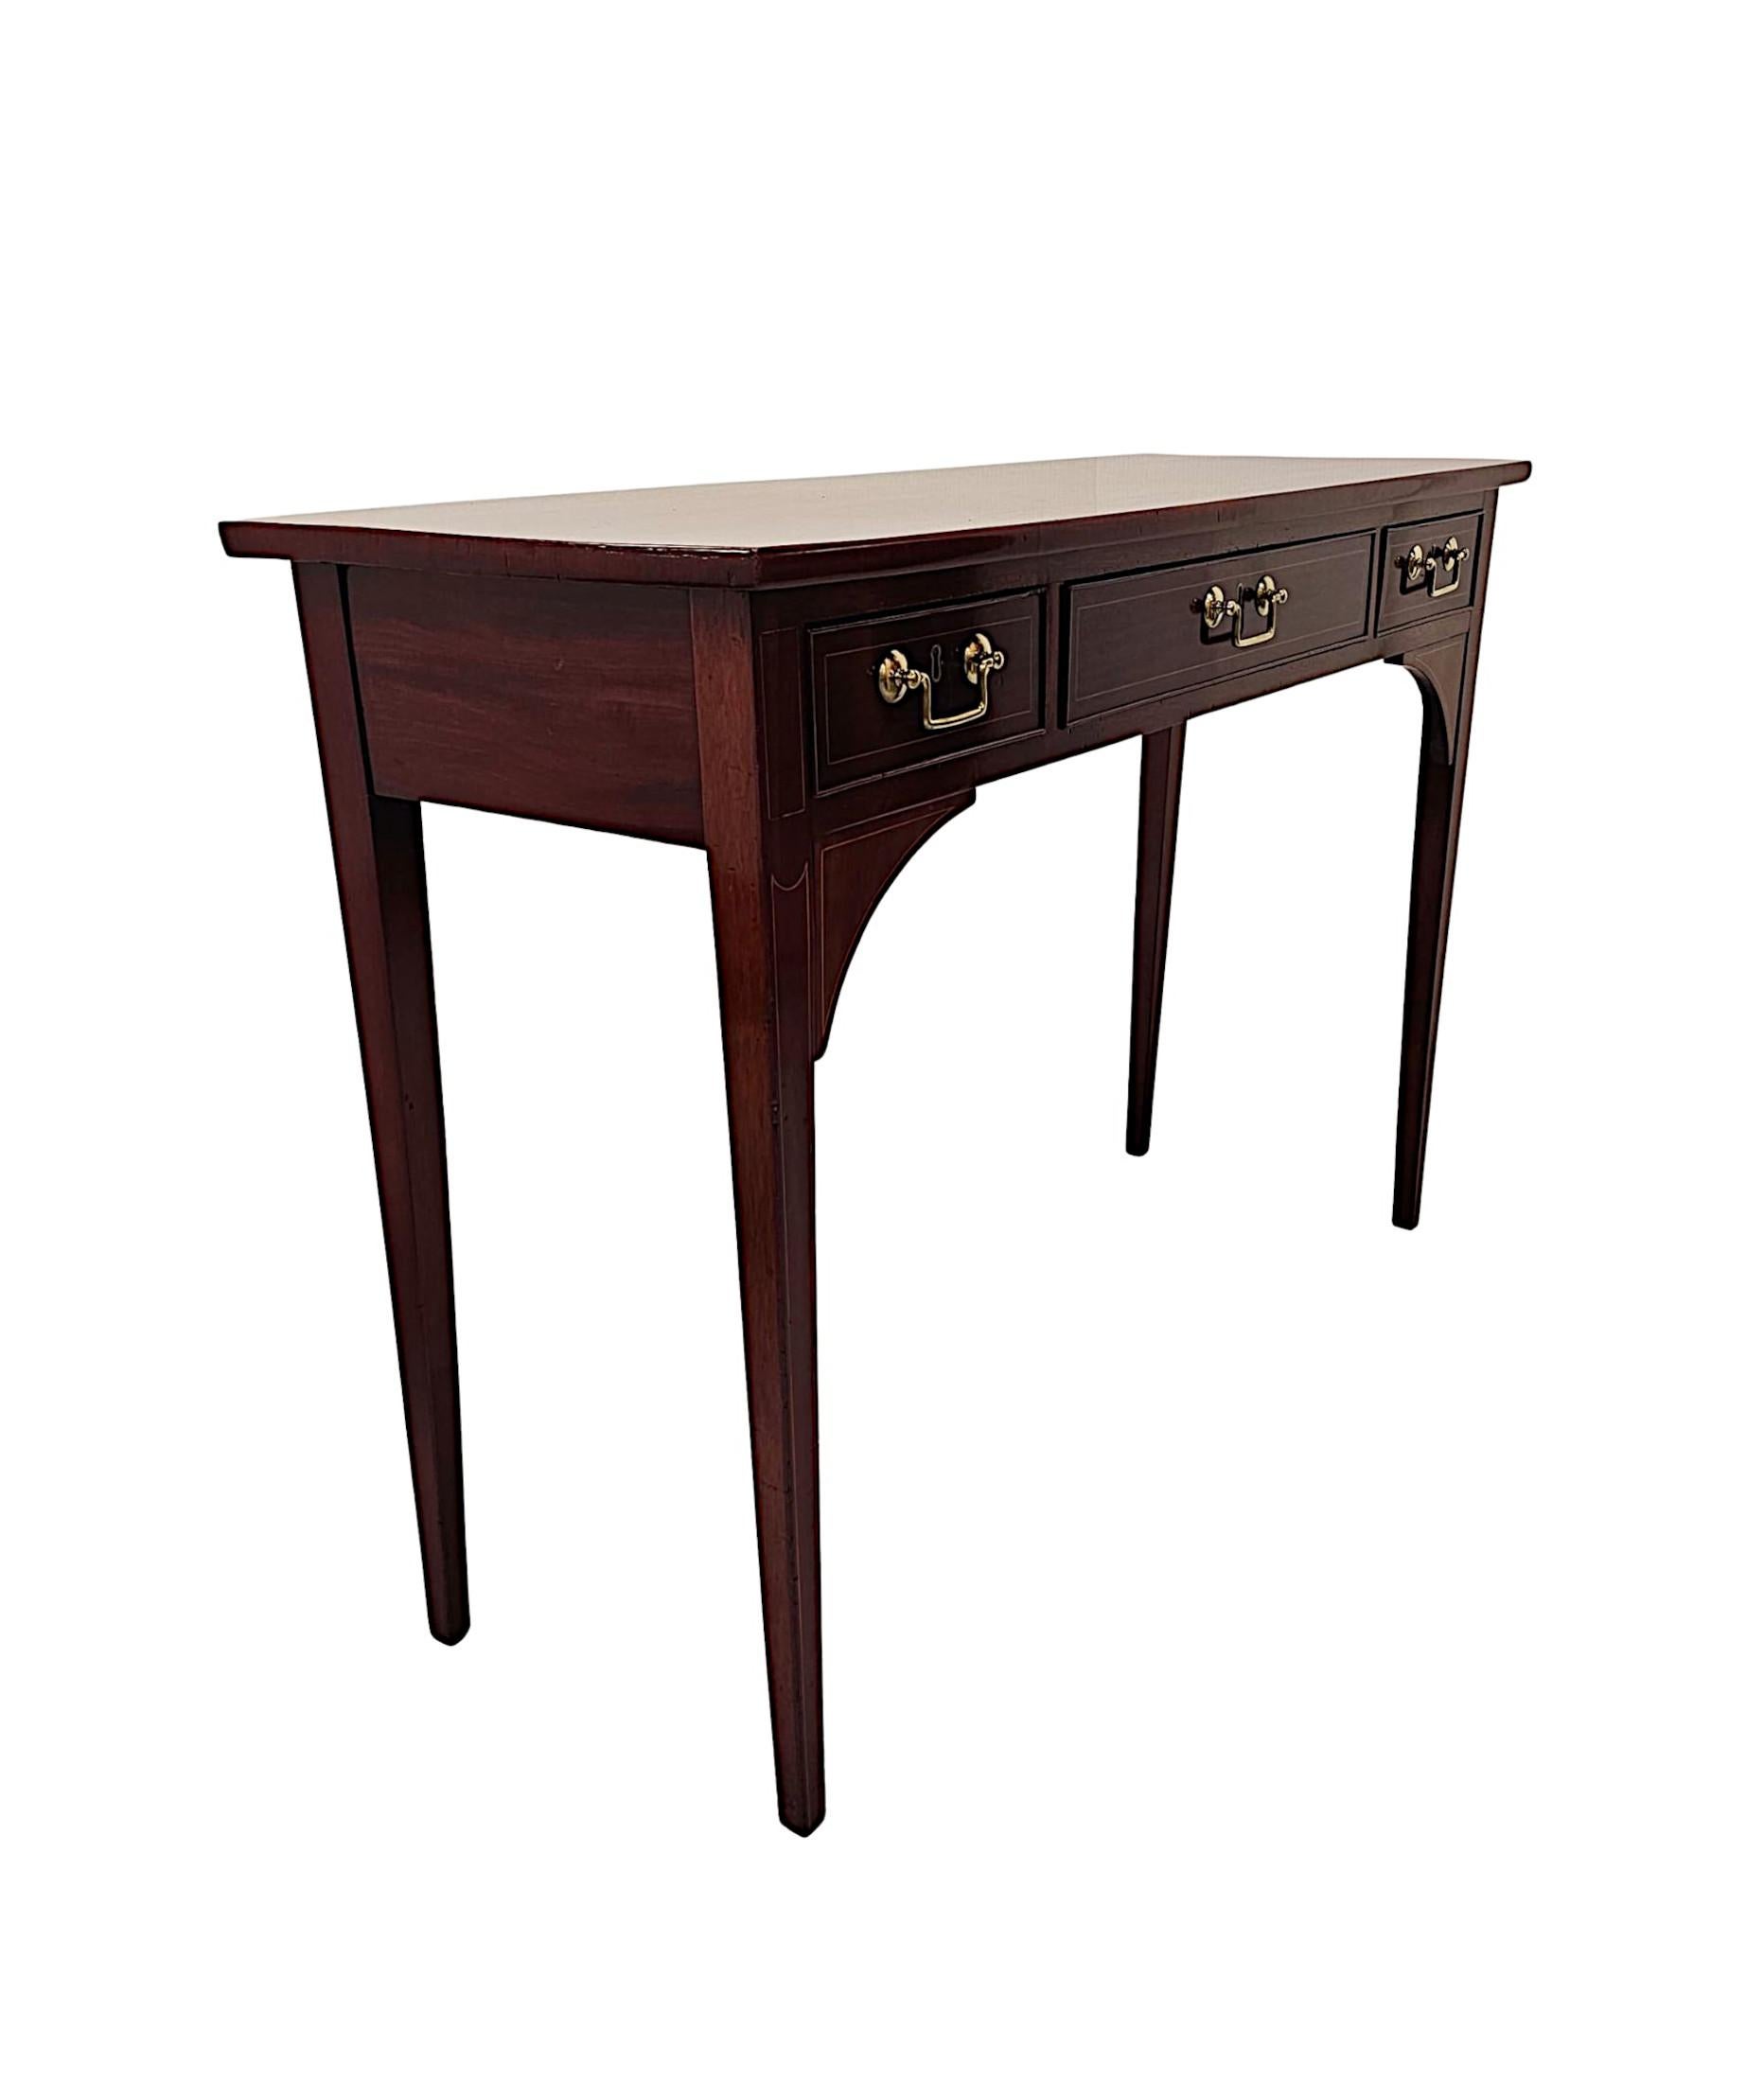 A very fine Edwardian mahogany console table of neat proportions, exceptional quality and beautifully carved with rich patination, grain and with delicate line inlaid panel detail throughout. The finely figured moulded top of rectangular form is